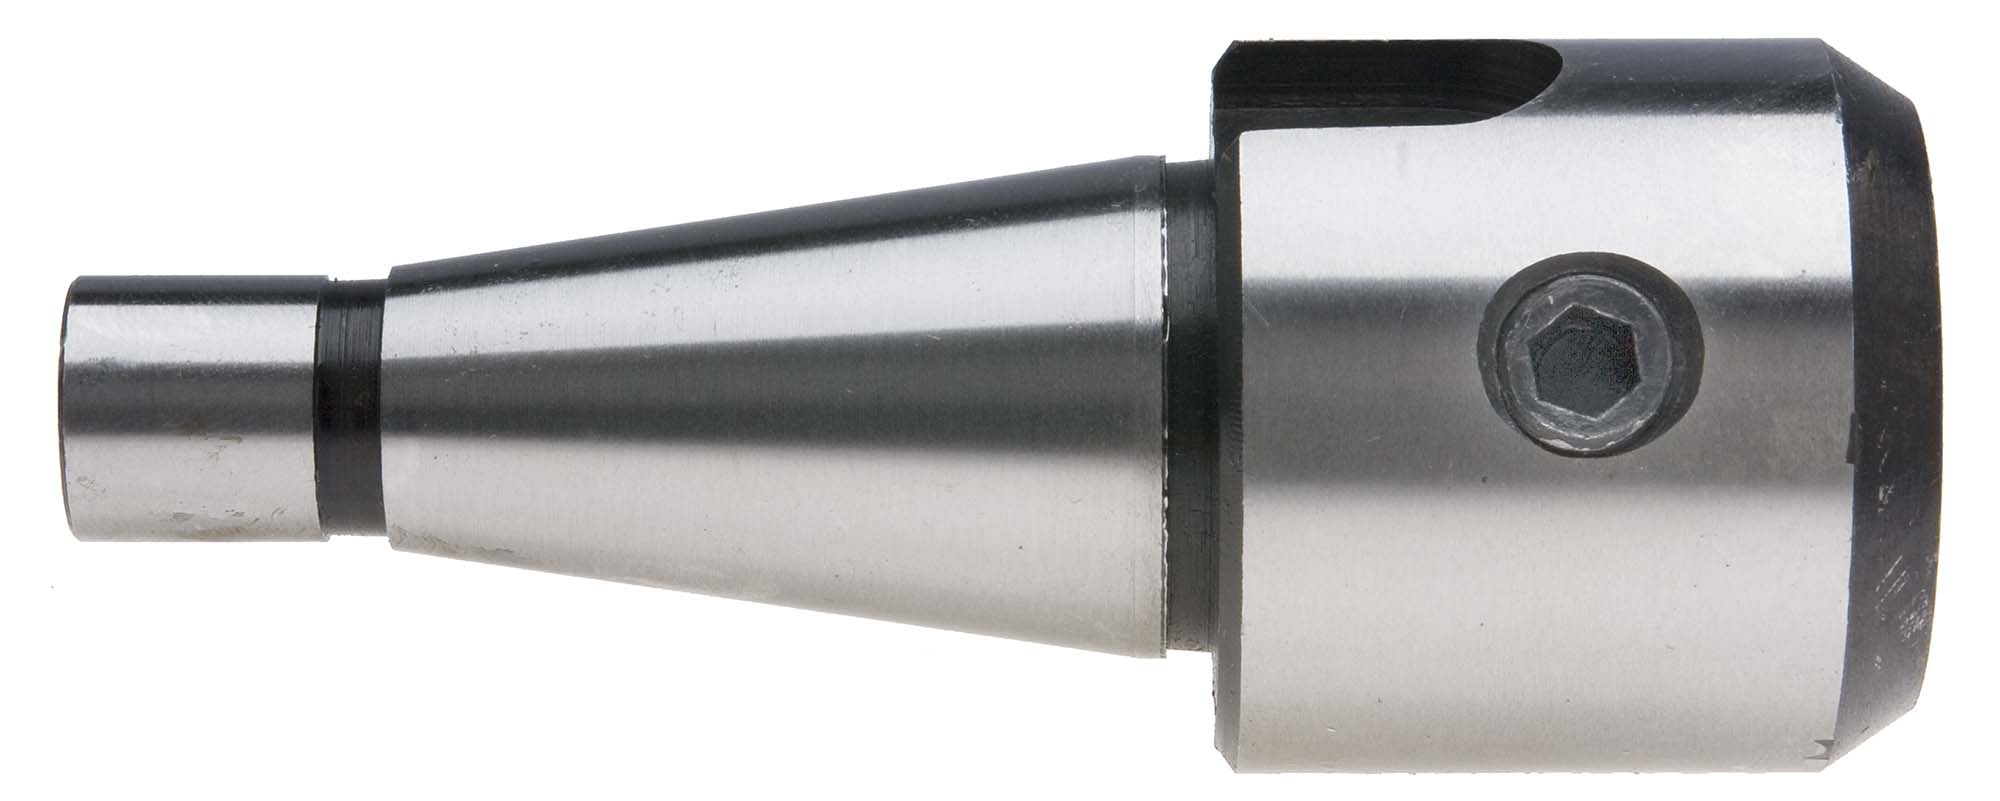 # 30 NST - 5/8 End Mill Adapter